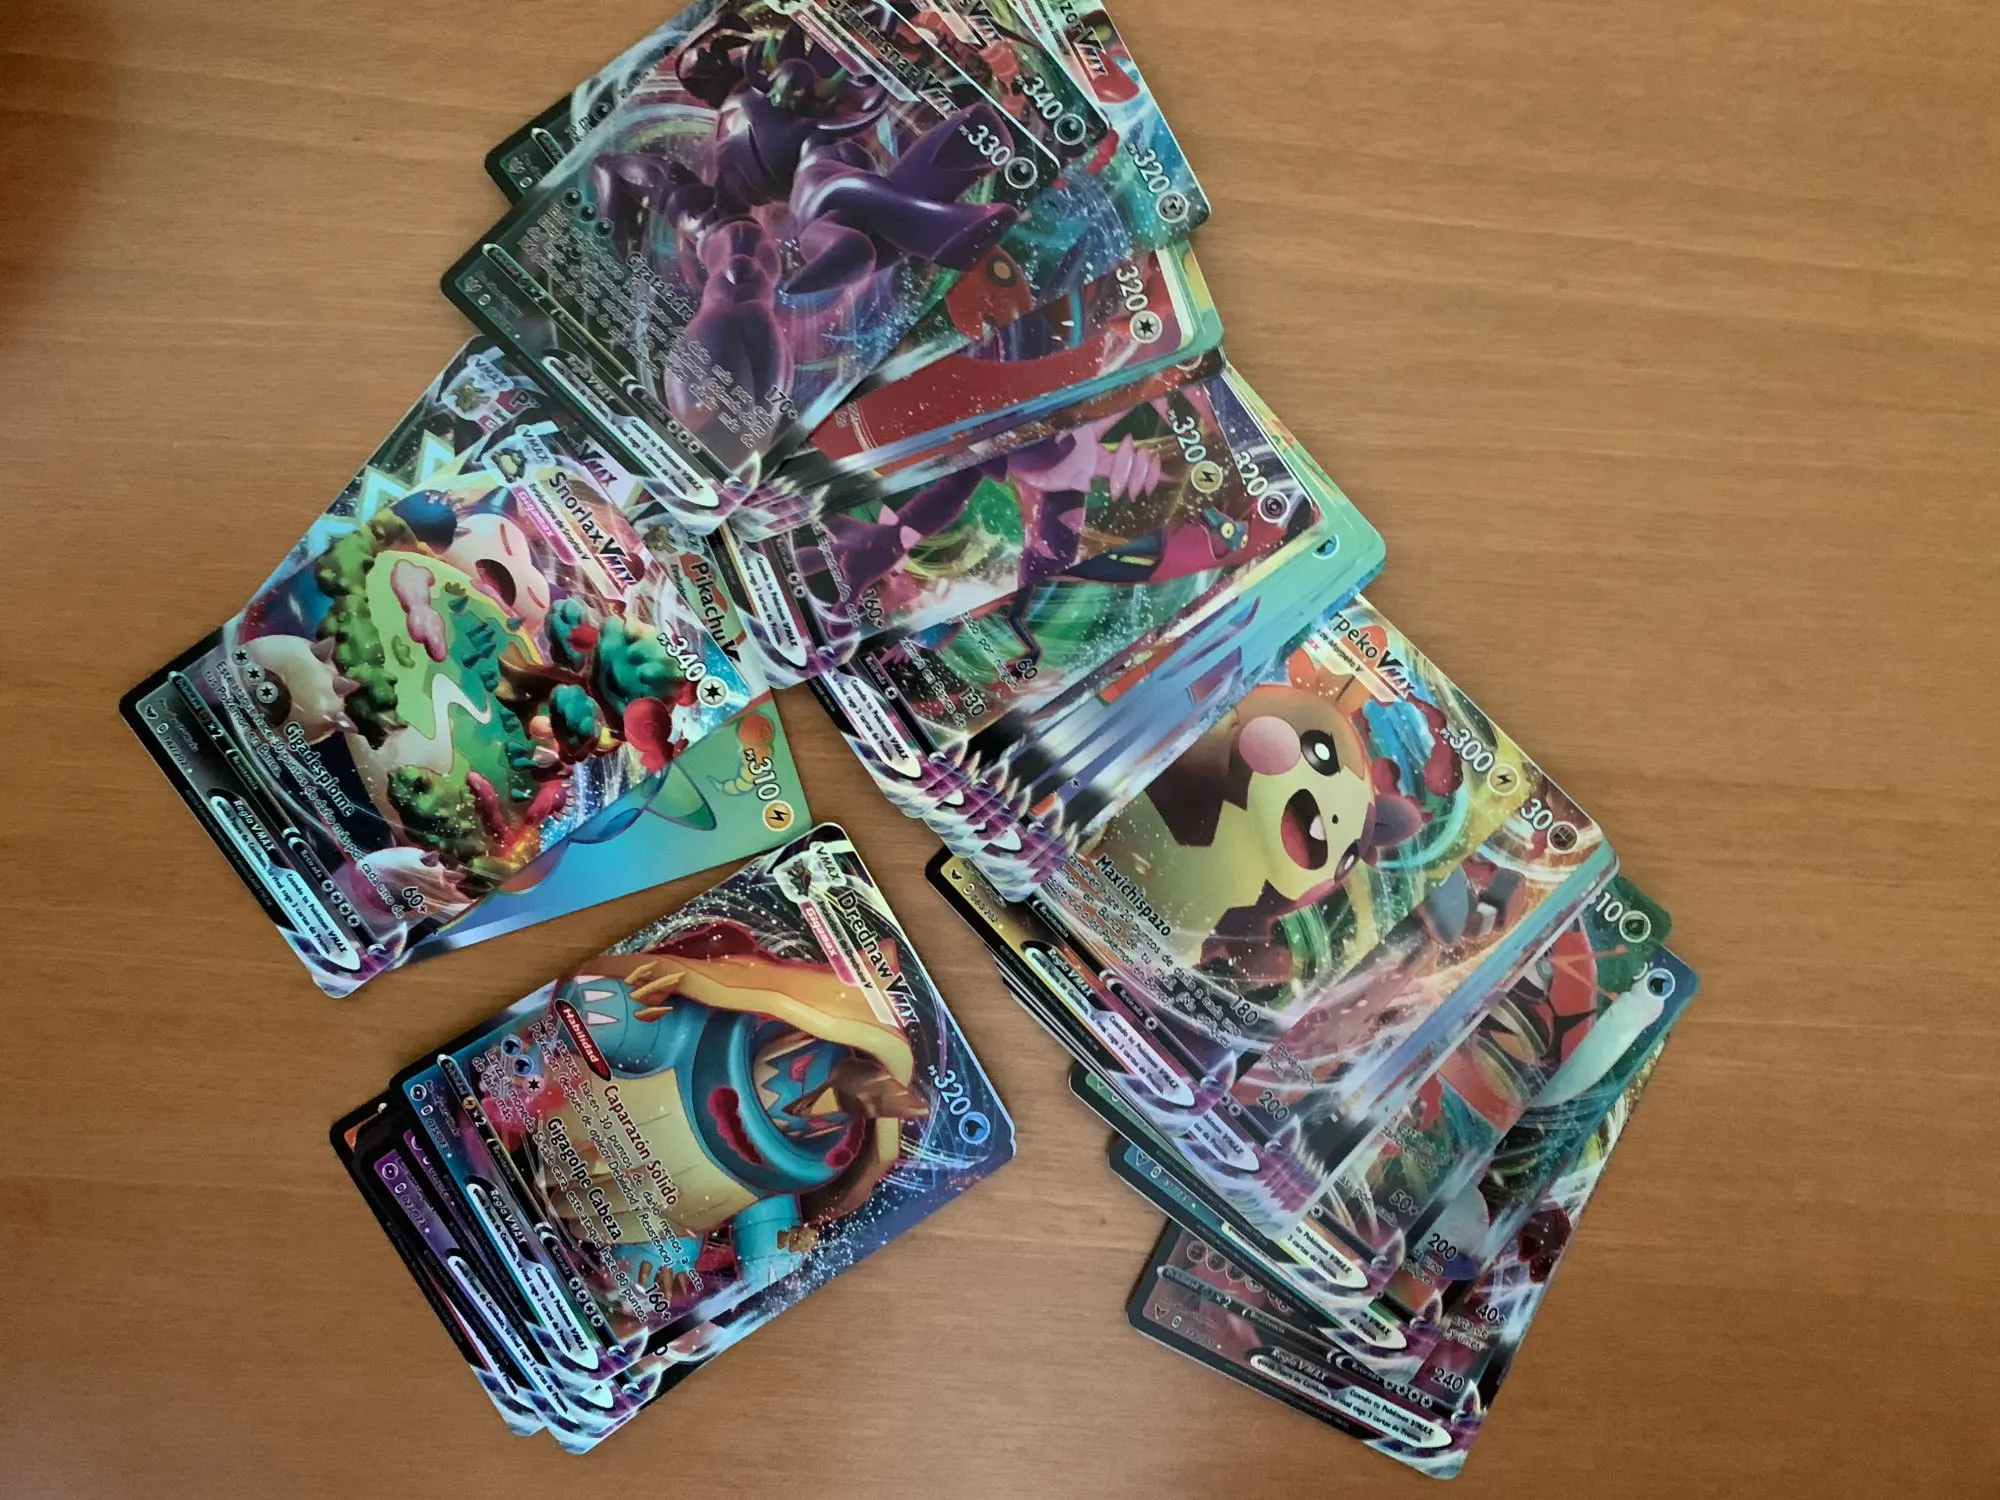 2021 New Pokemon Cards in Spanish TAG TEAM GX VMAX Trainer Energy  Holographic Playing Cards Game Castellano Español Children Toy Color:  ES200V VMAX HOT